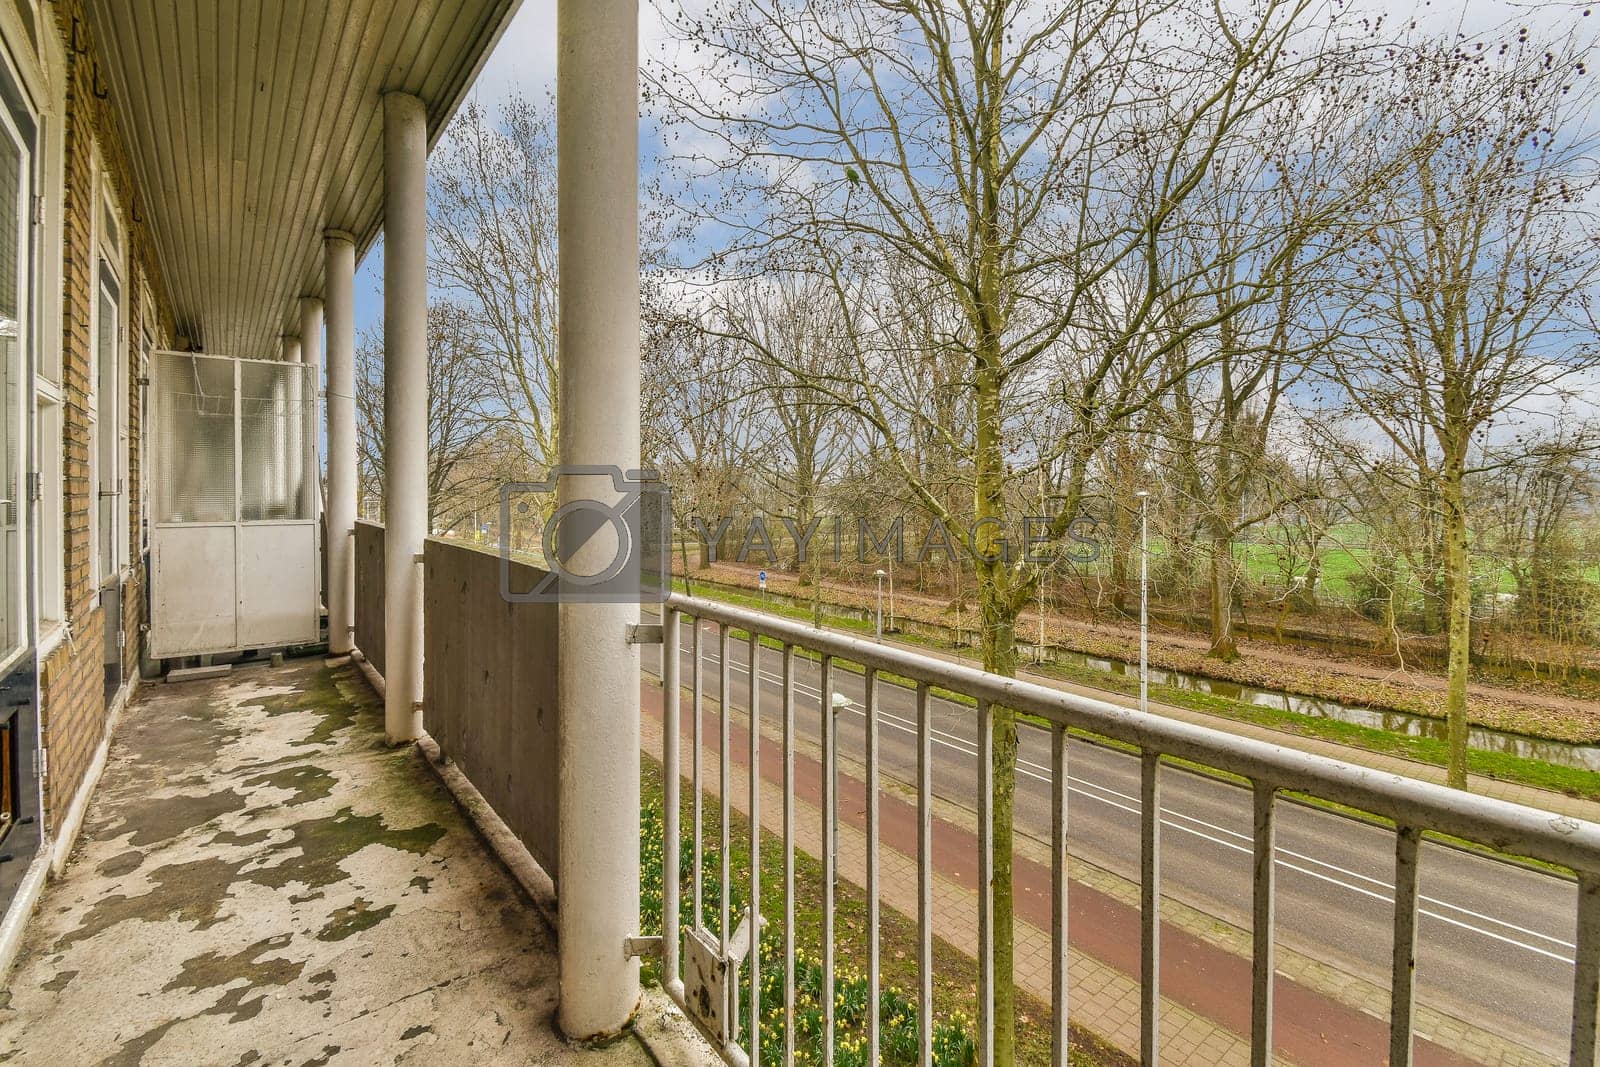 Royalty free image of the front porch of a building with a guard rail by casamedia